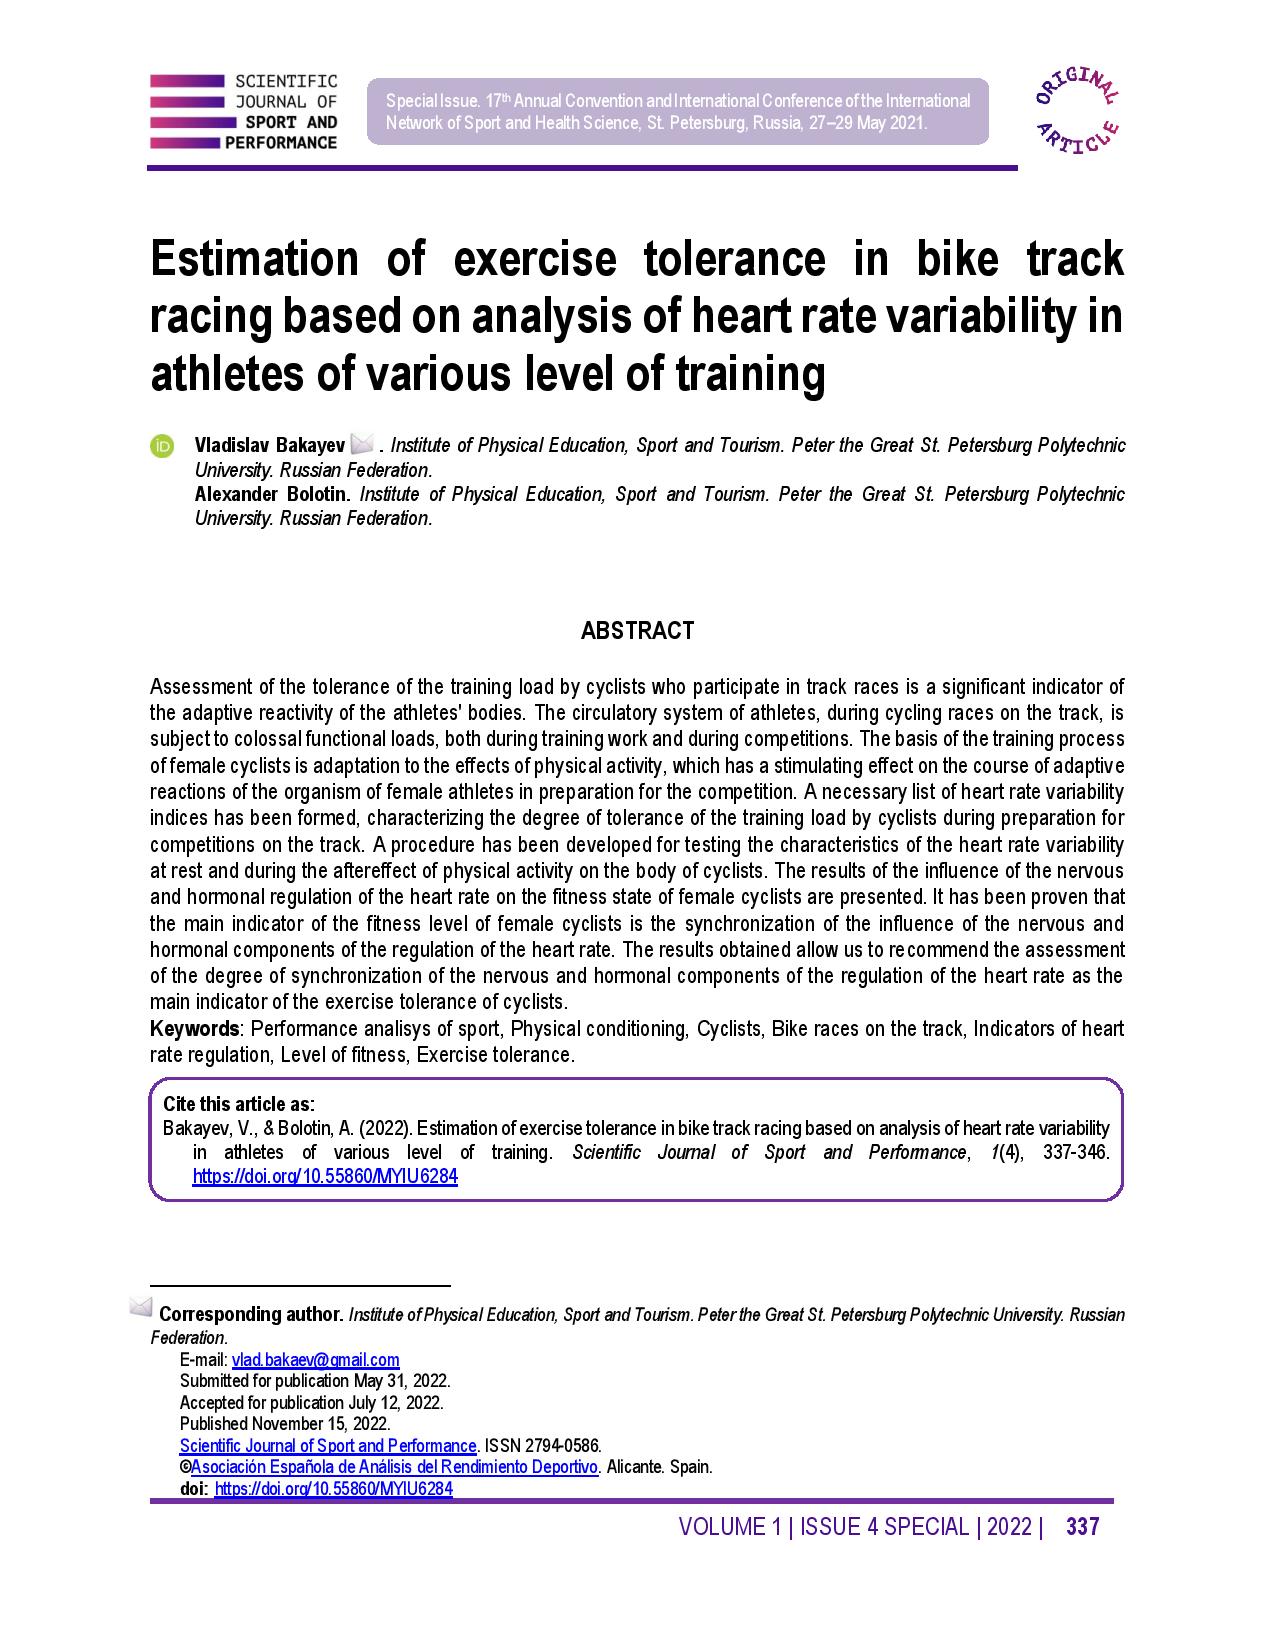 Estimation of exercise tolerance in bike track racing based on analysis of heart rate variability in athletes of various level of training